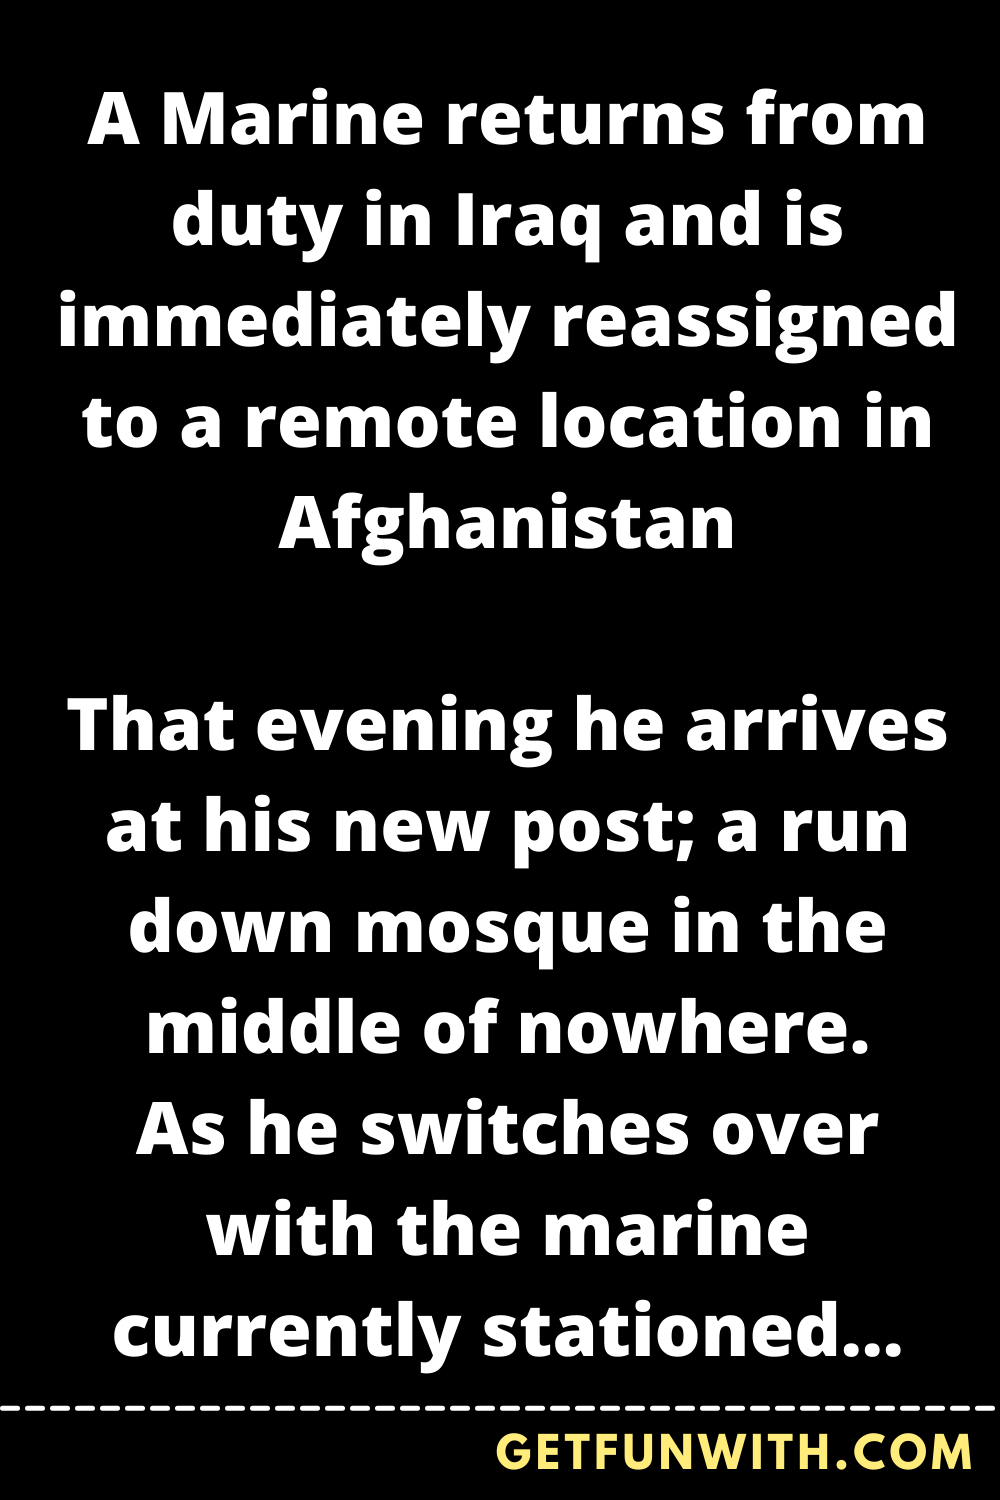 A Marine returns from duty in Iraq and is immediately reassigned to a remote location in Afghanistan